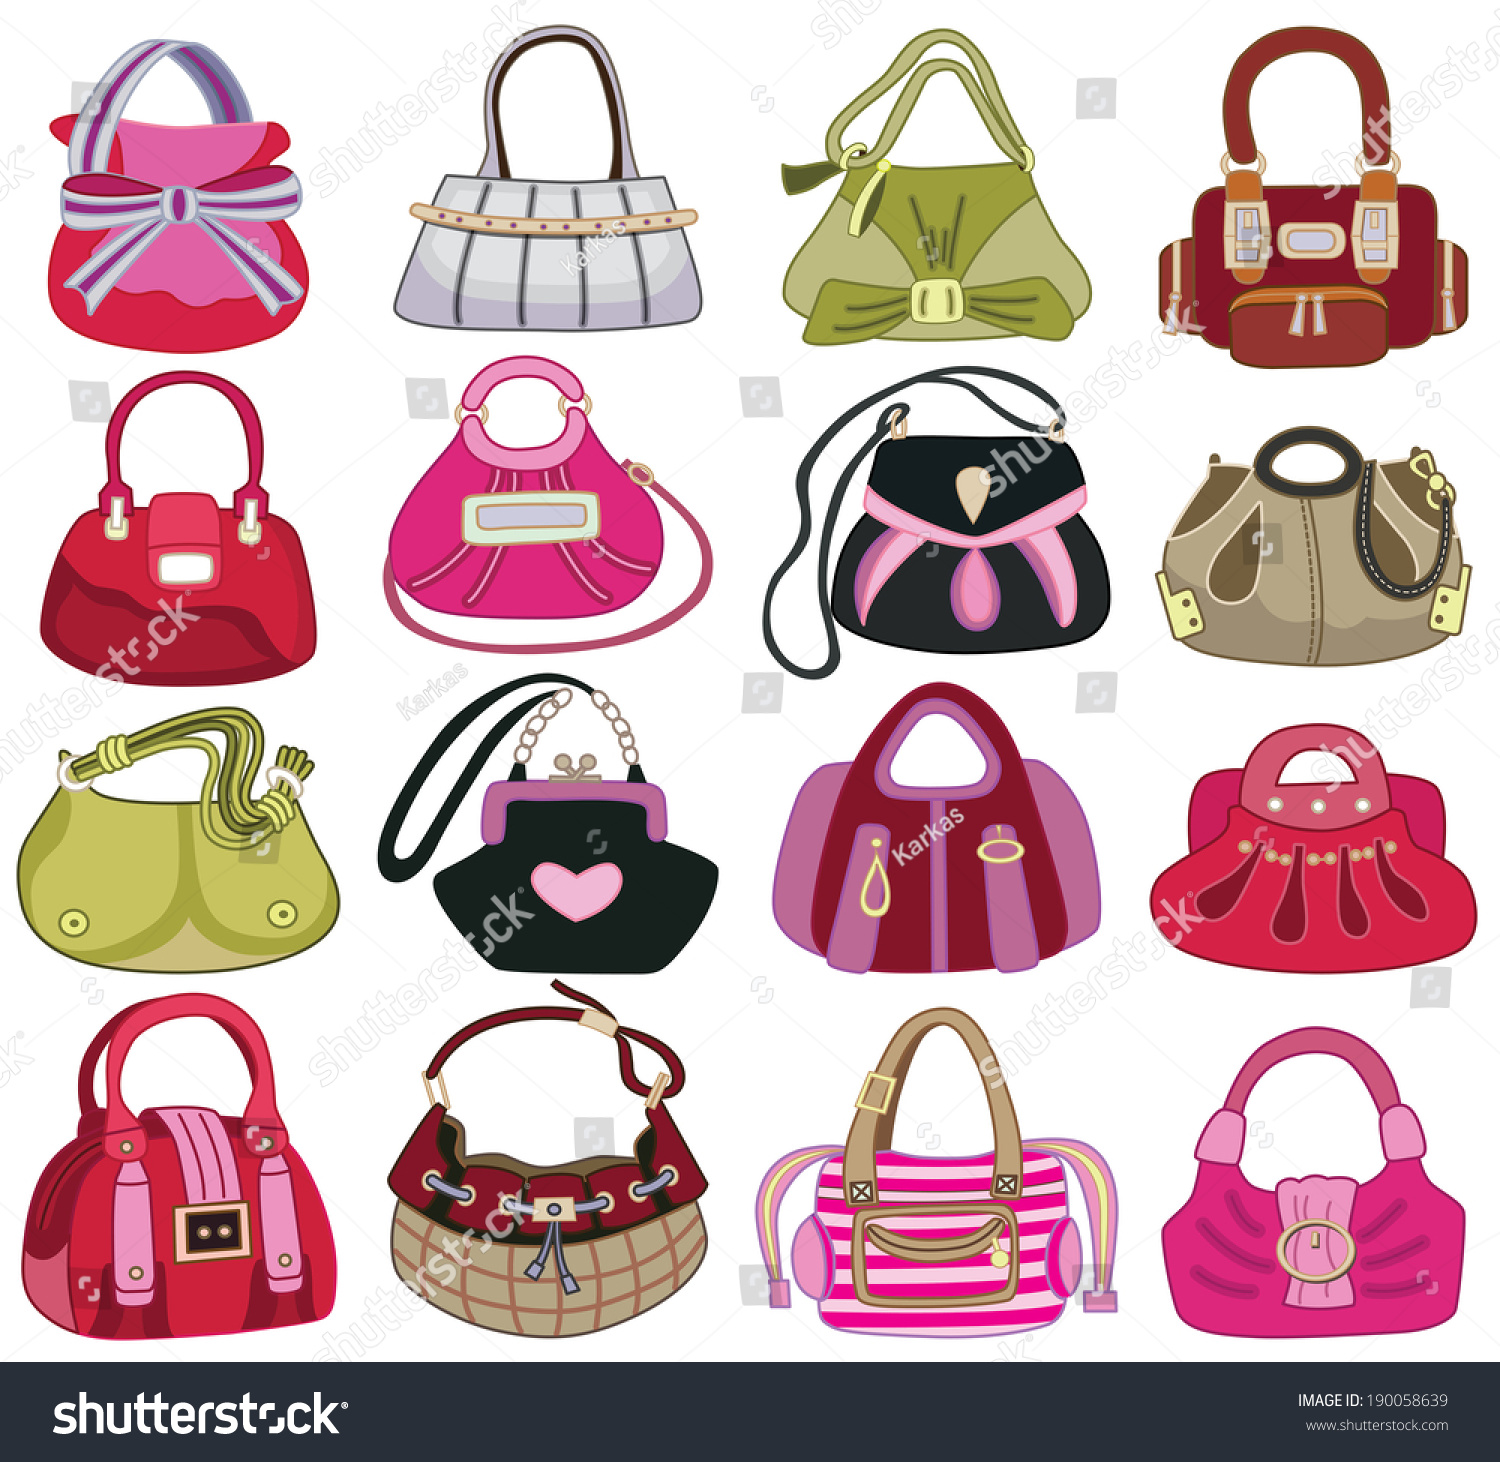 Collection Of Fashion Bag (Vector Illustration) - 190058639 : Shutterstock